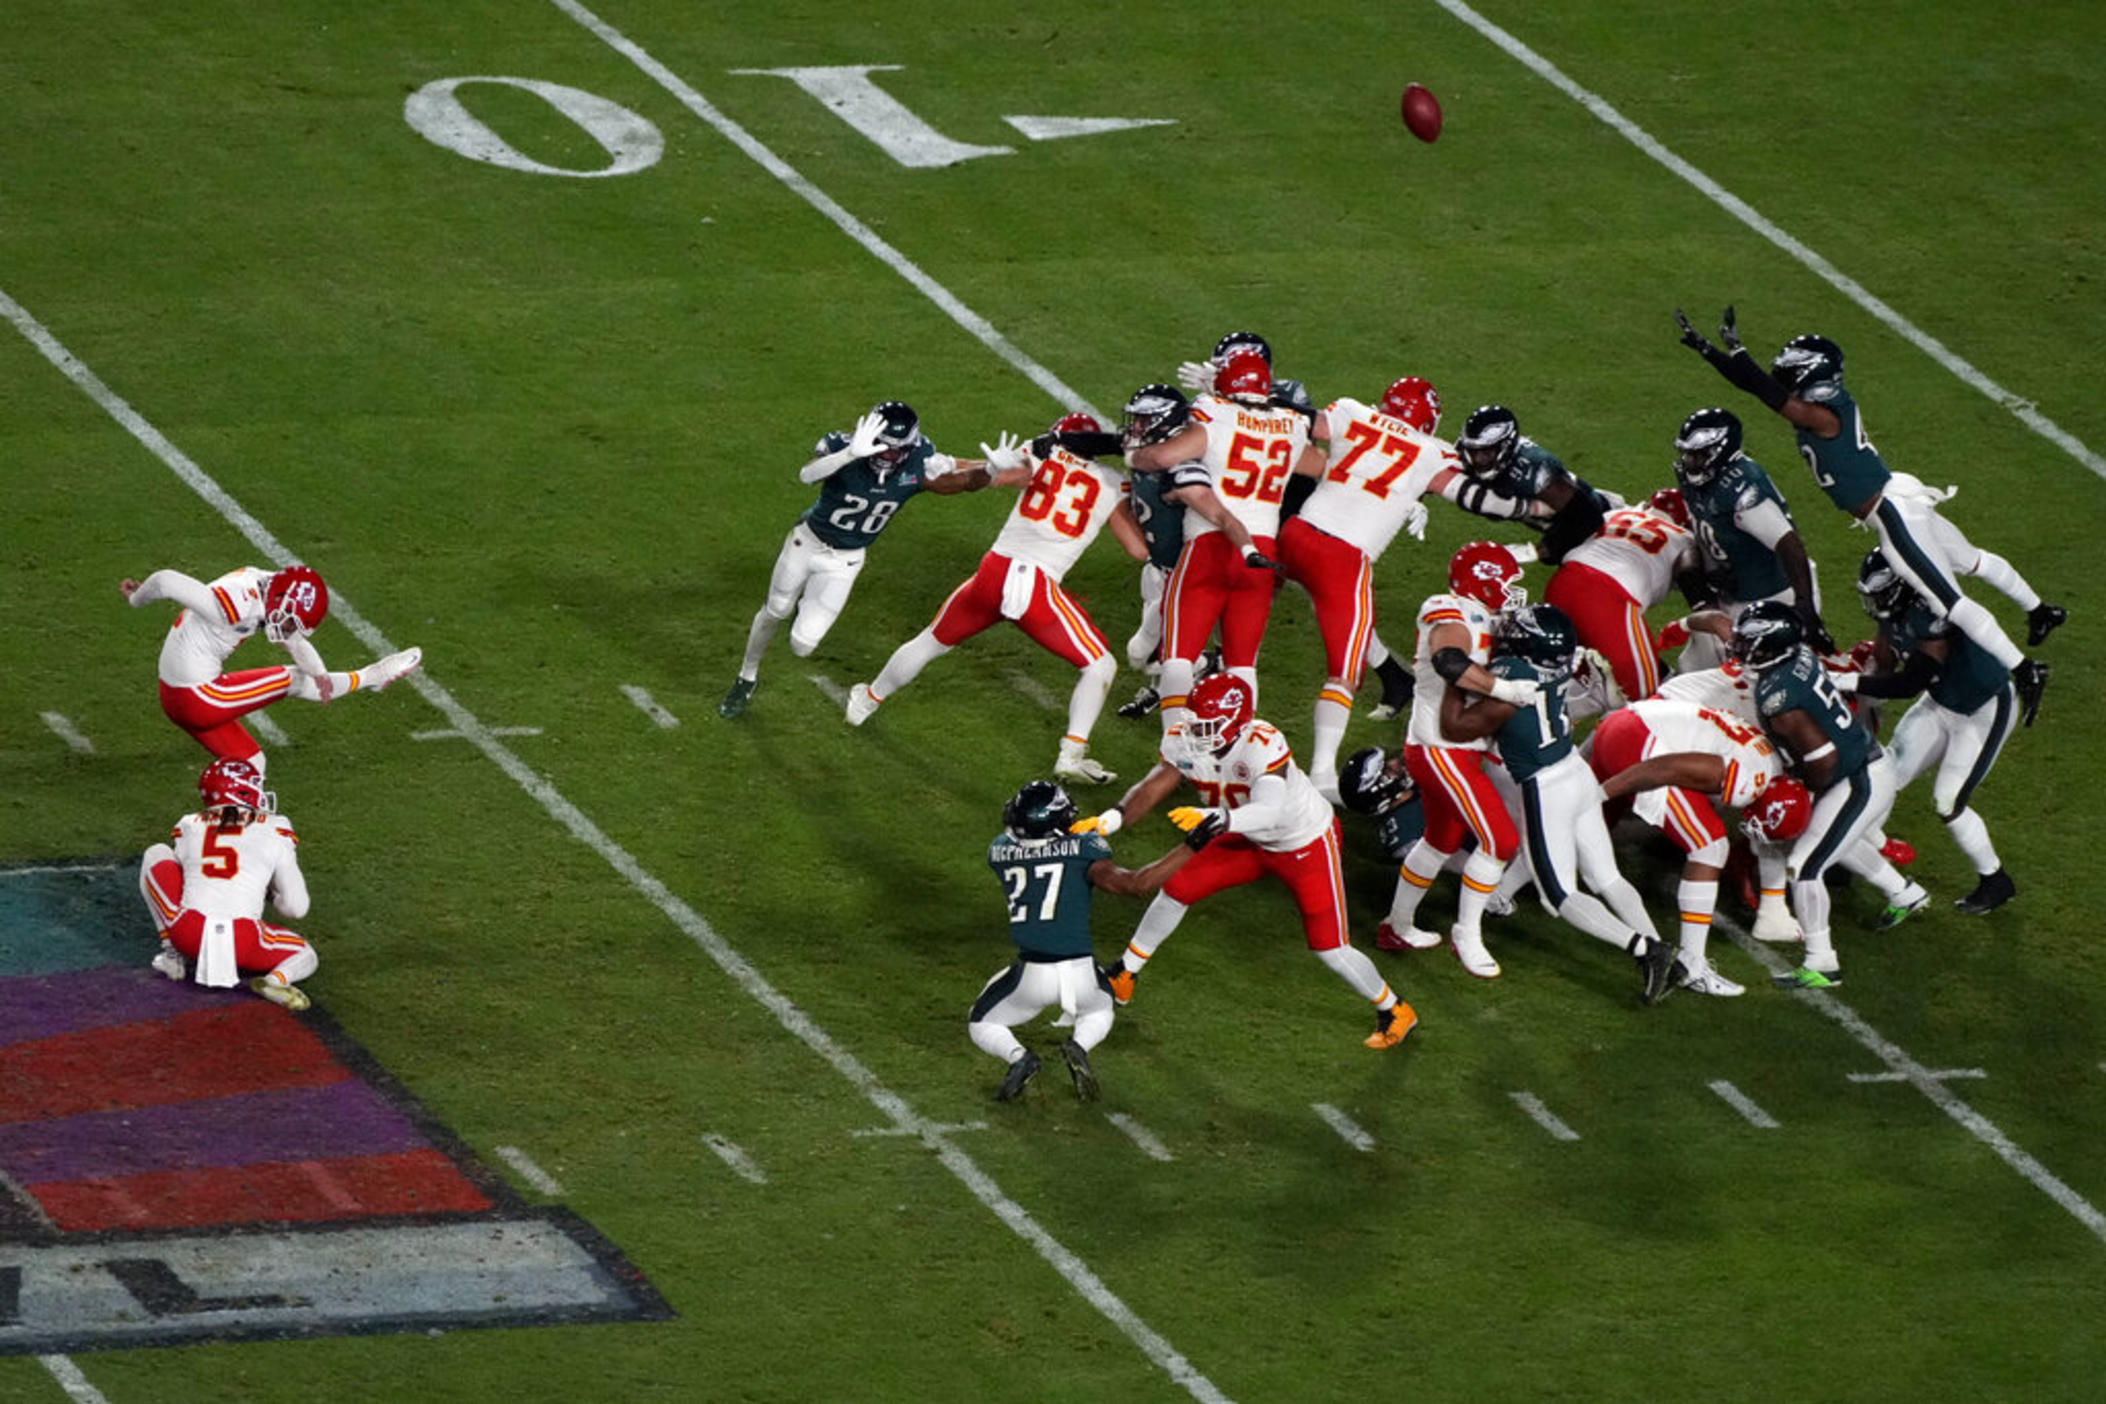 Kansas City Chiefs place kicker Harrison Butker (7) kicks the game-winning field goal as punter Tommy Townsend (5) holds during the second half of the NFL Super Bowl 57 football game against the Philadelphia Eagles, Sunday, Feb. 12, 2023, in Glendale, Ariz.